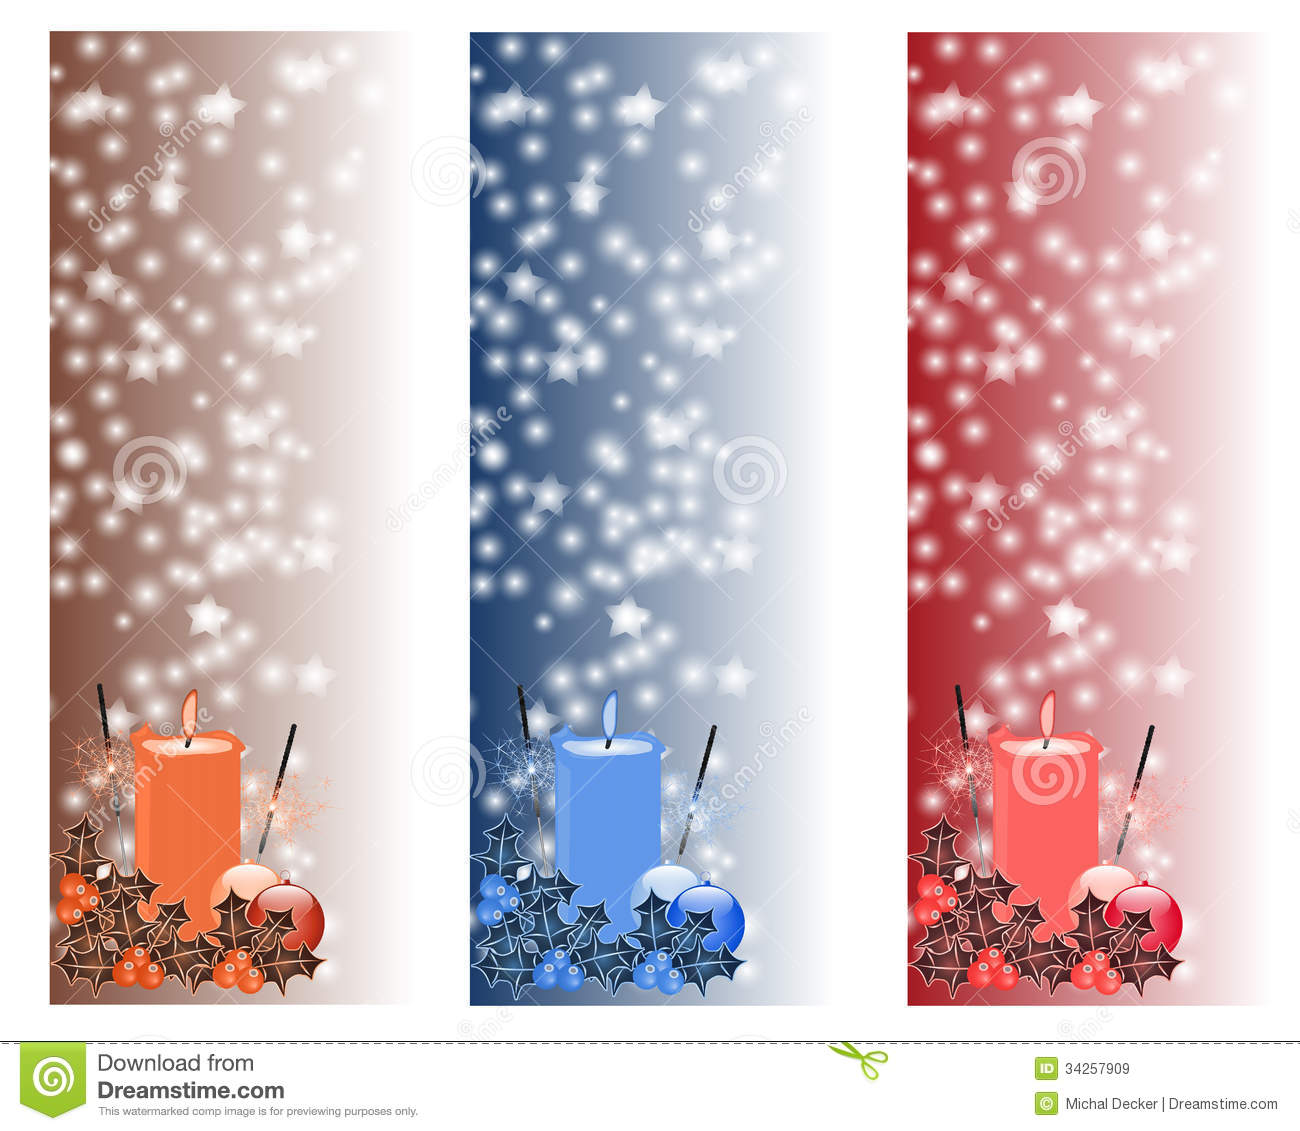 Christmas Vertical Banner In Three Colors With Candle And Mistletoe